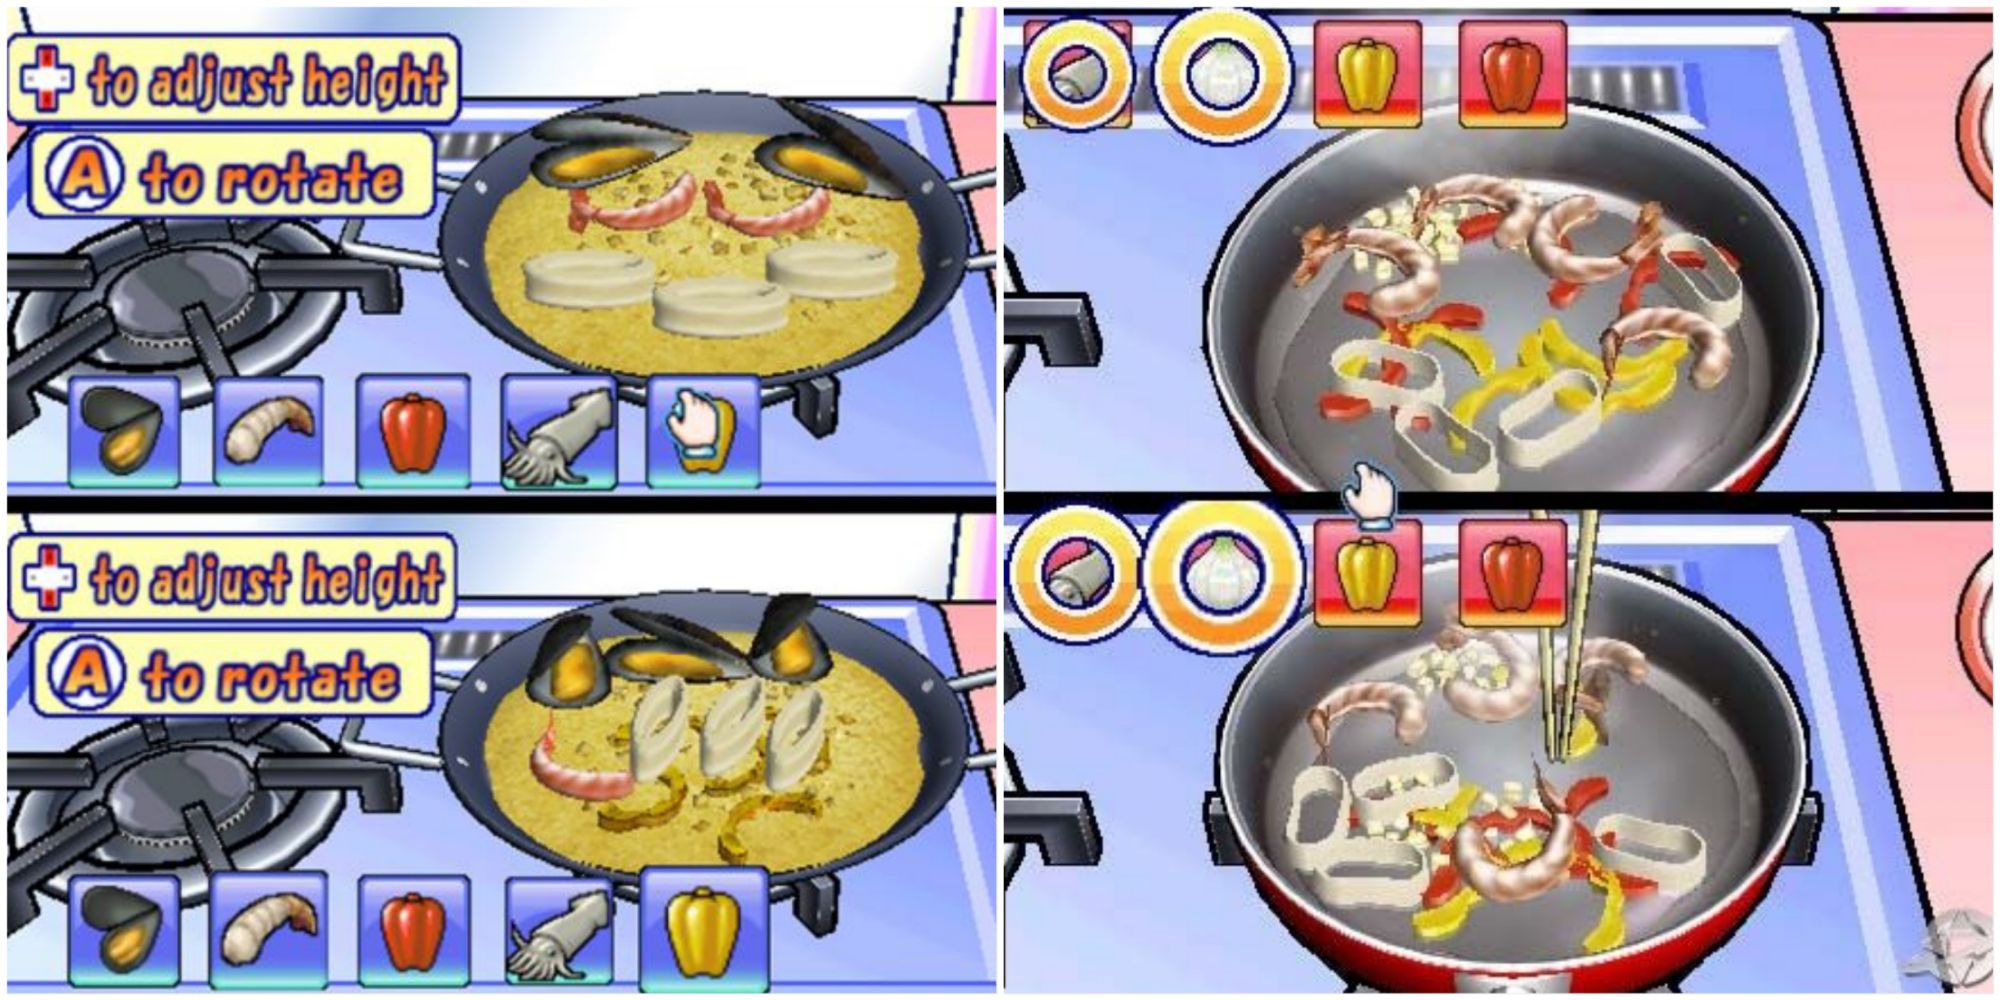 A split image of players competing to fry a seafood dish in cream sauce and players competing to fry seafood in empty pan